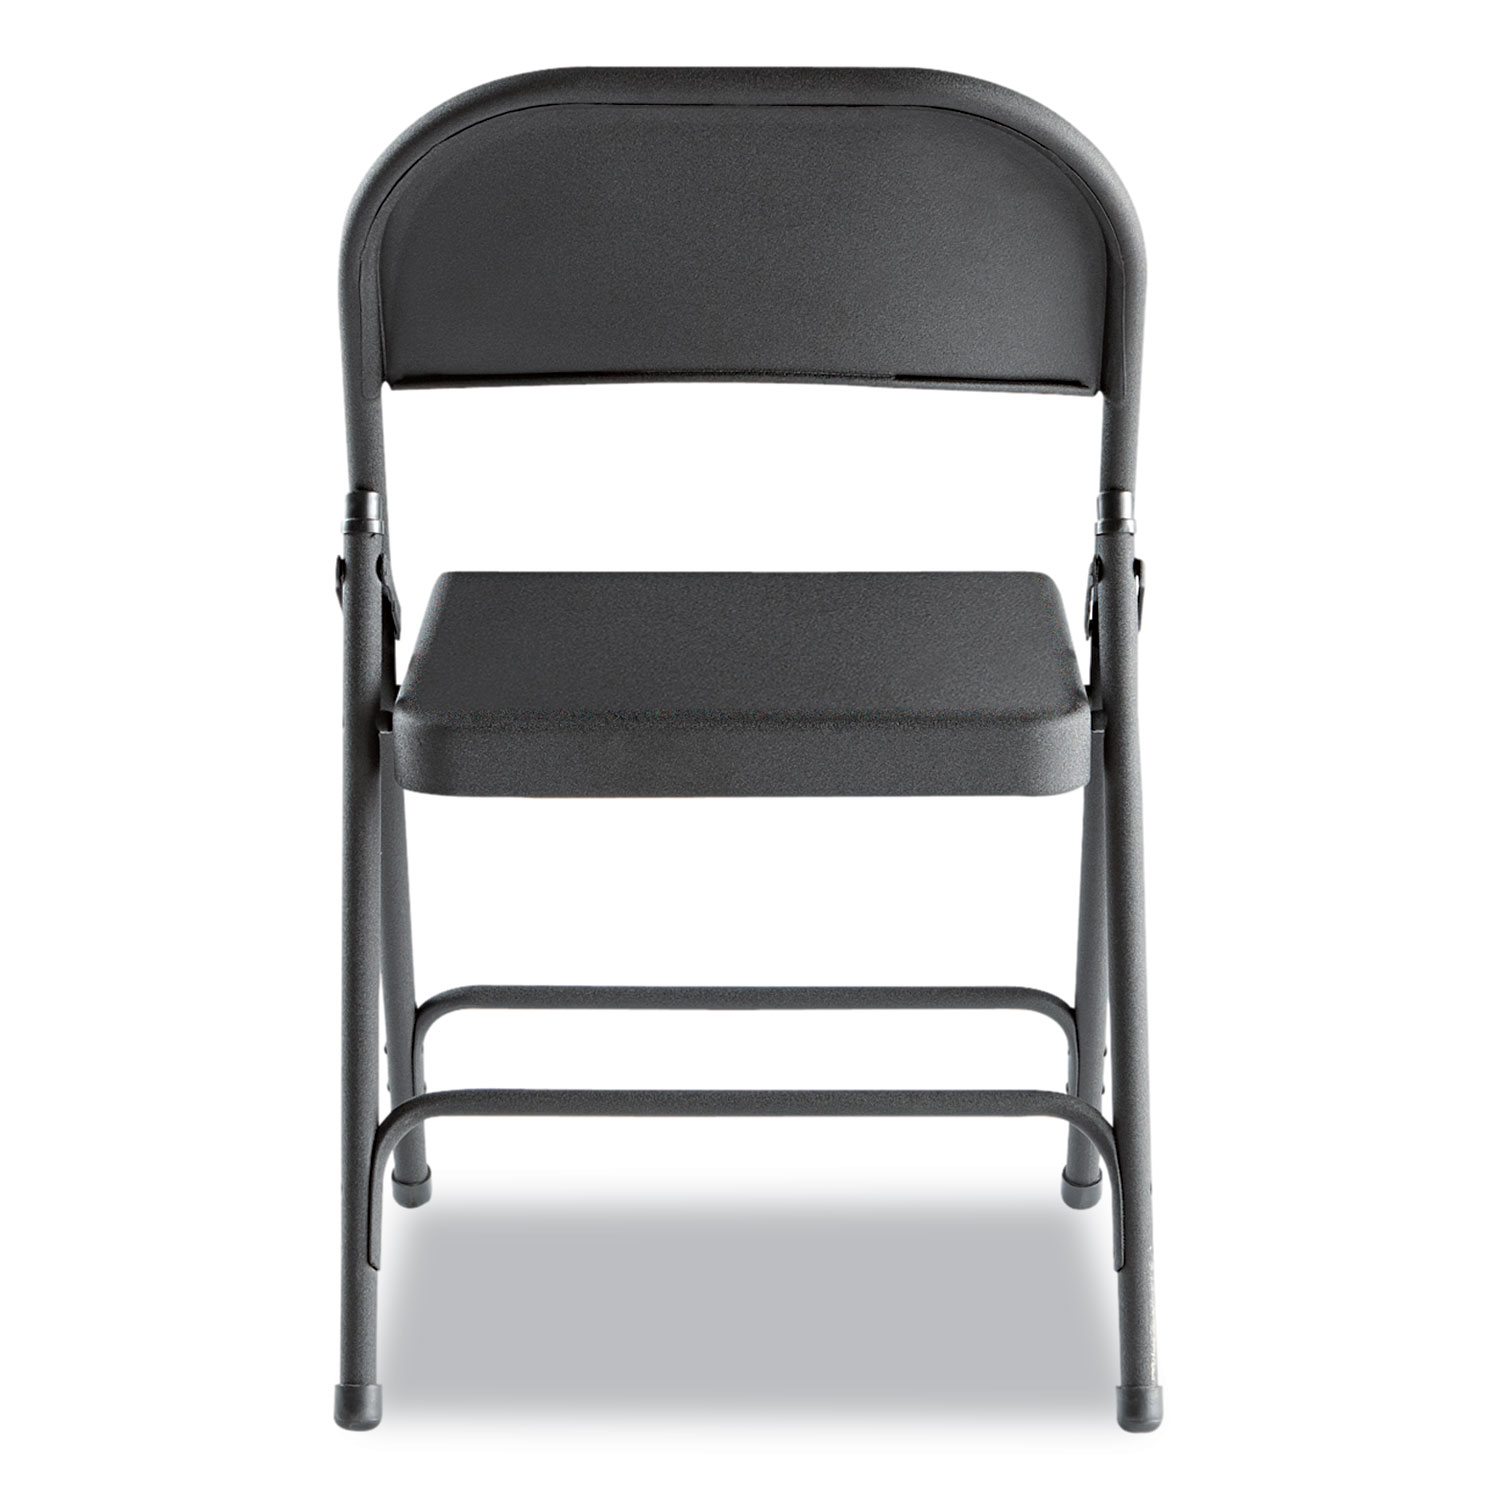 Steel Folding Chair with Two-Brace Support, Graphite, 4/Carton